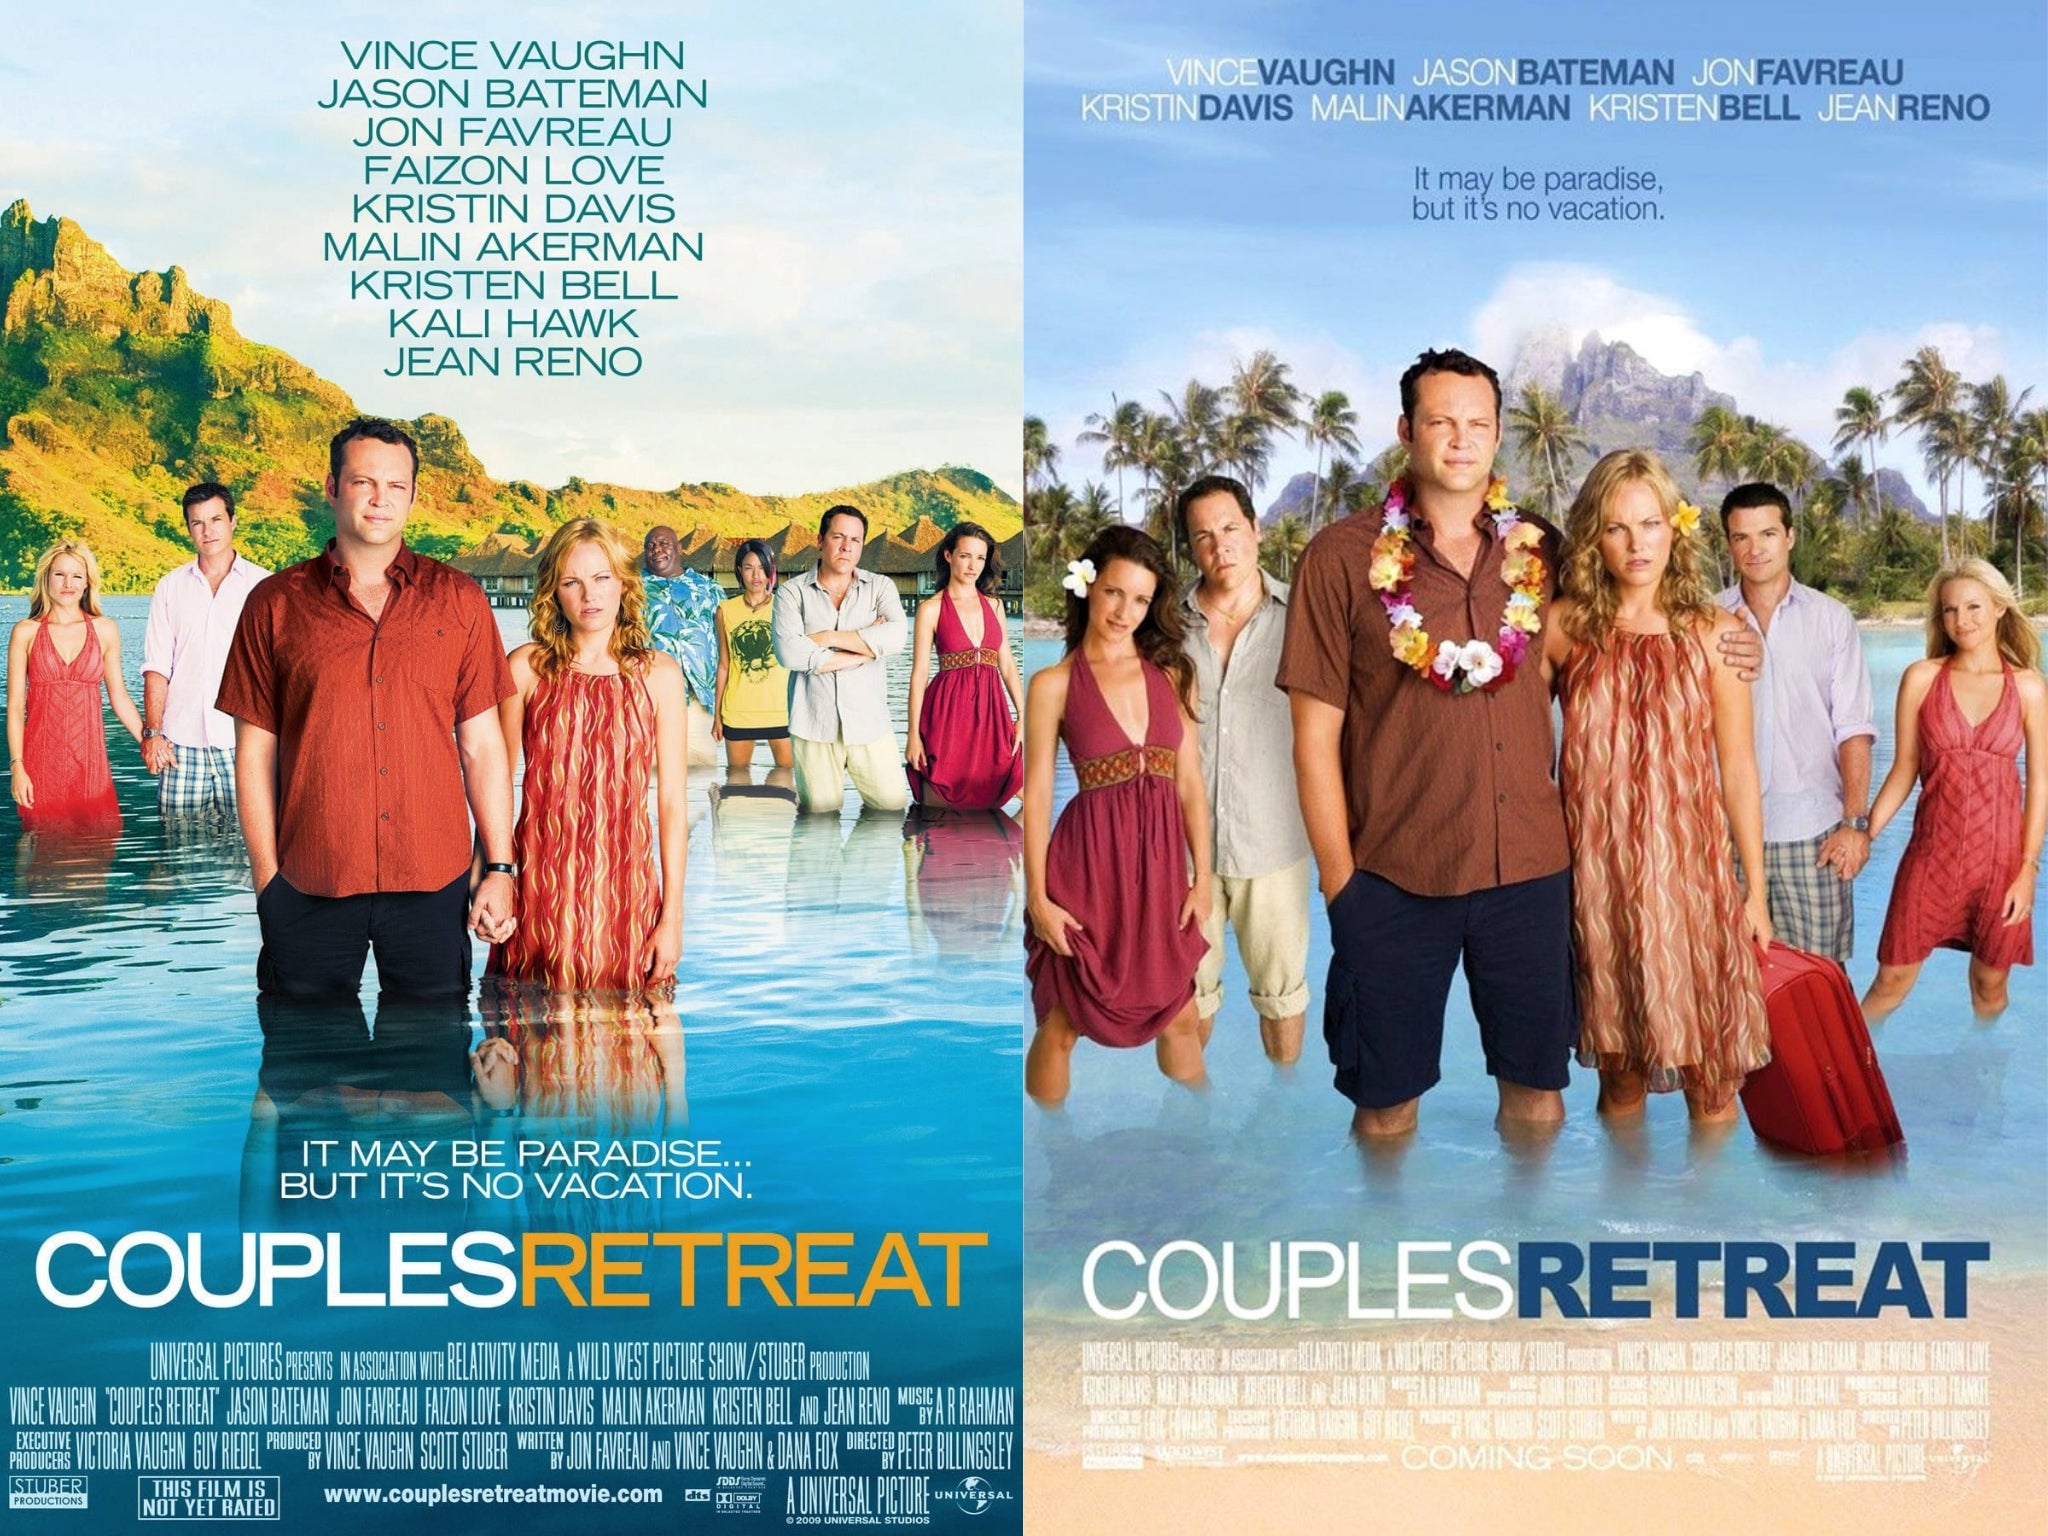 Faizon Love sues Universal Pictures for racially segregating him from Couples Retreat poster The Independent